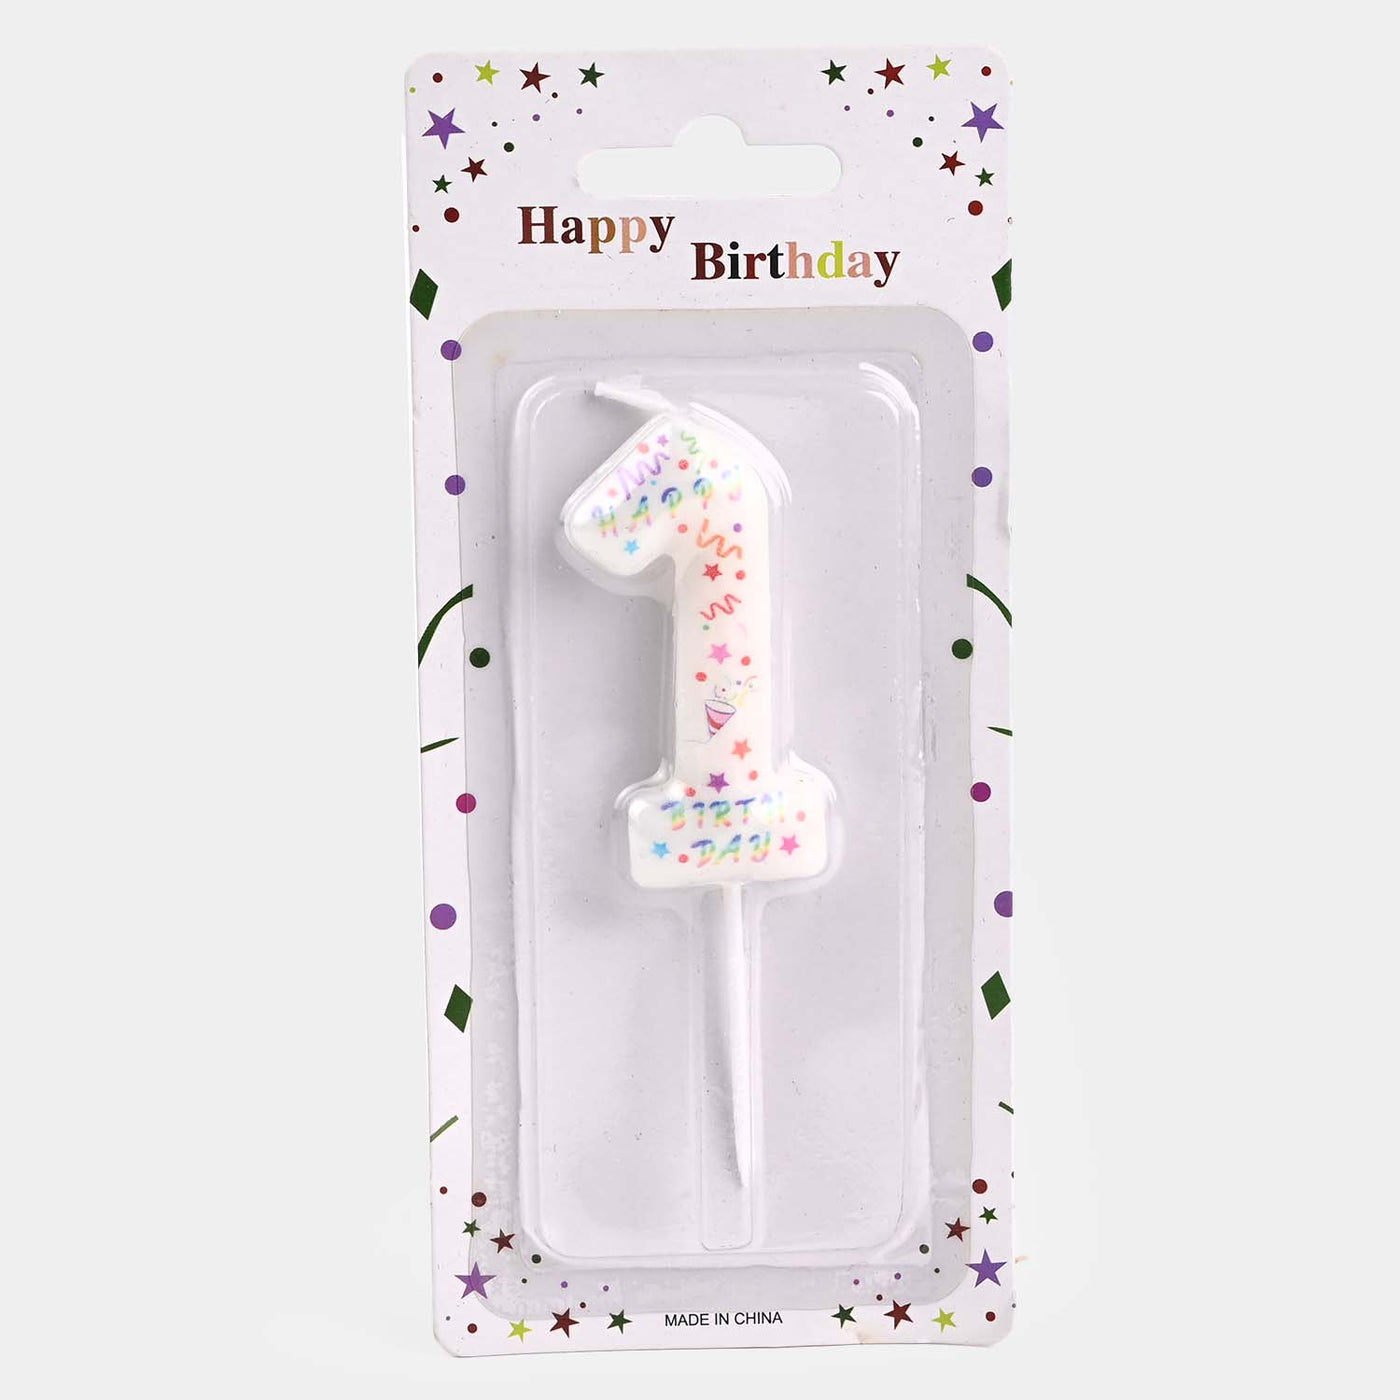 Party Number Candles Digital Cake Topper